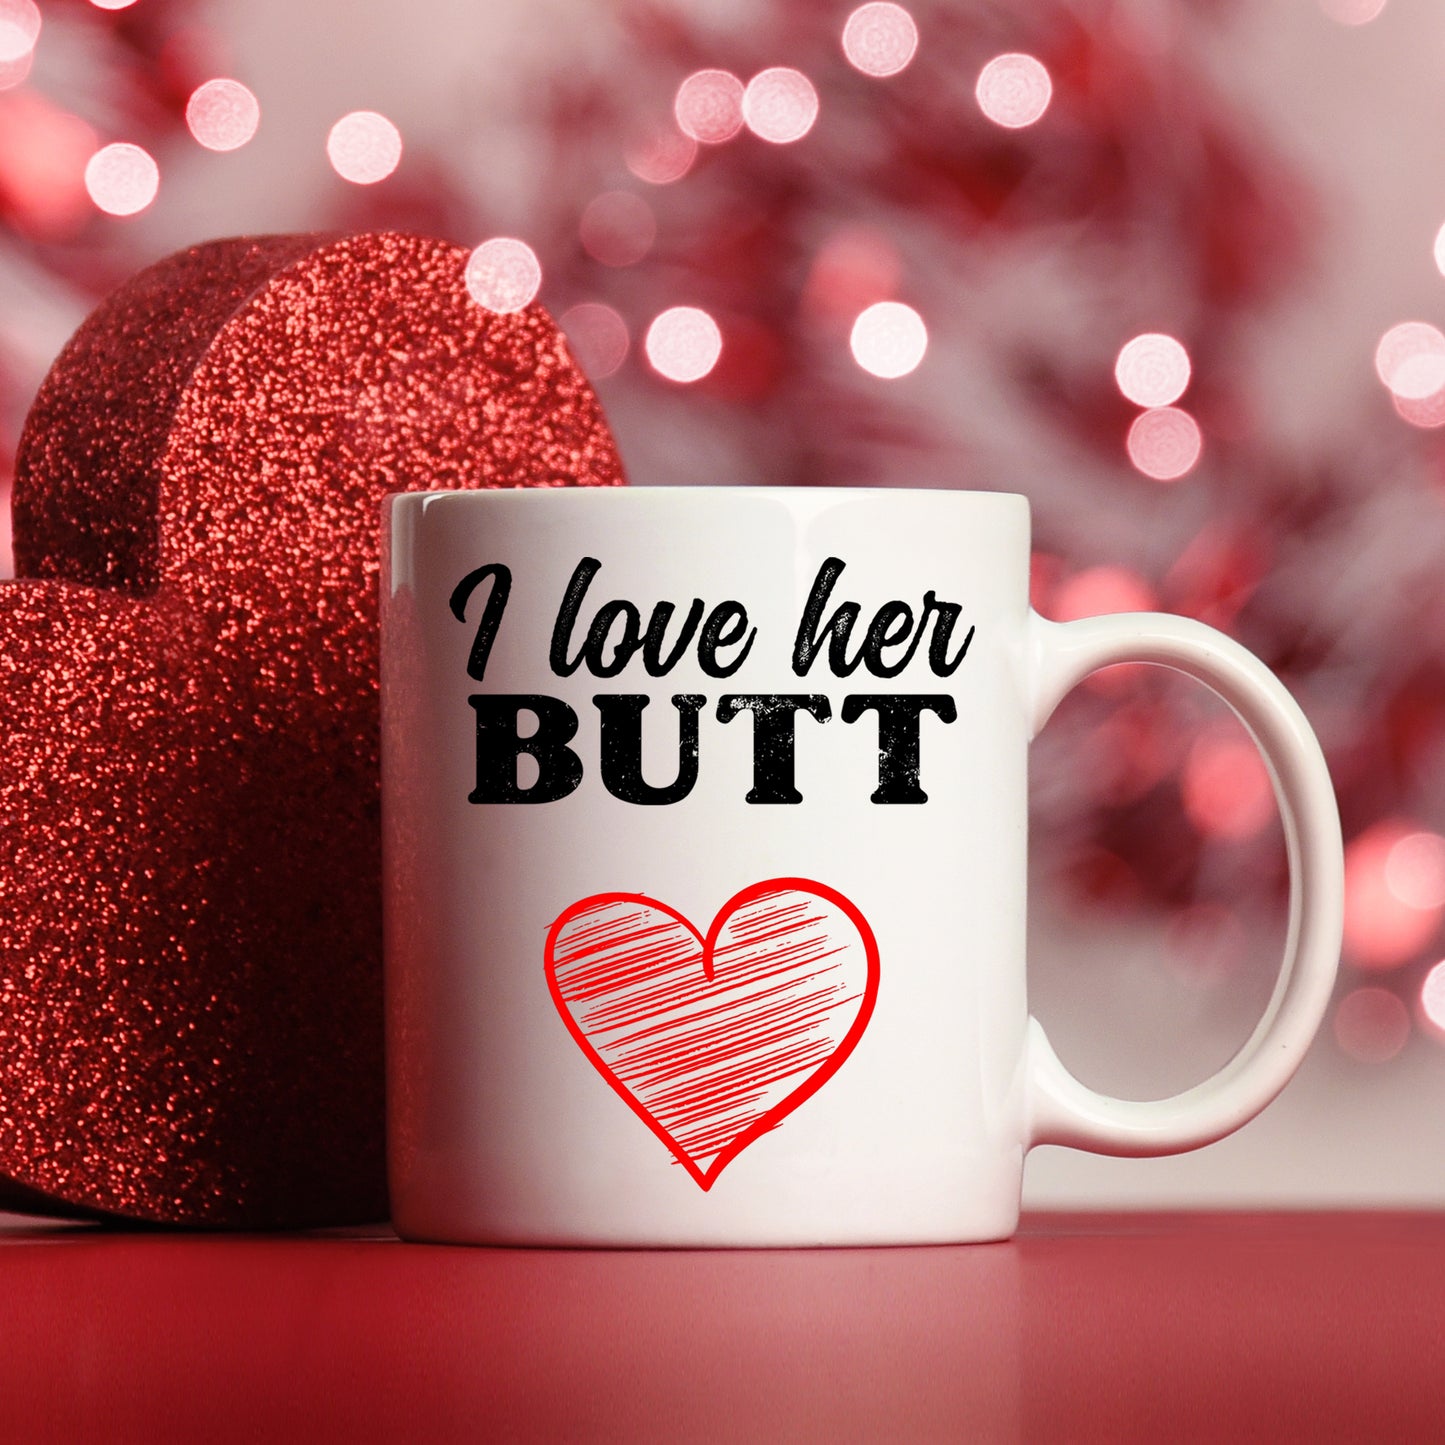 I Love His Beard / Her Butt Mug and/or Coaster Gift  - Always Looking Good - I Love Her Butt Mug Only  